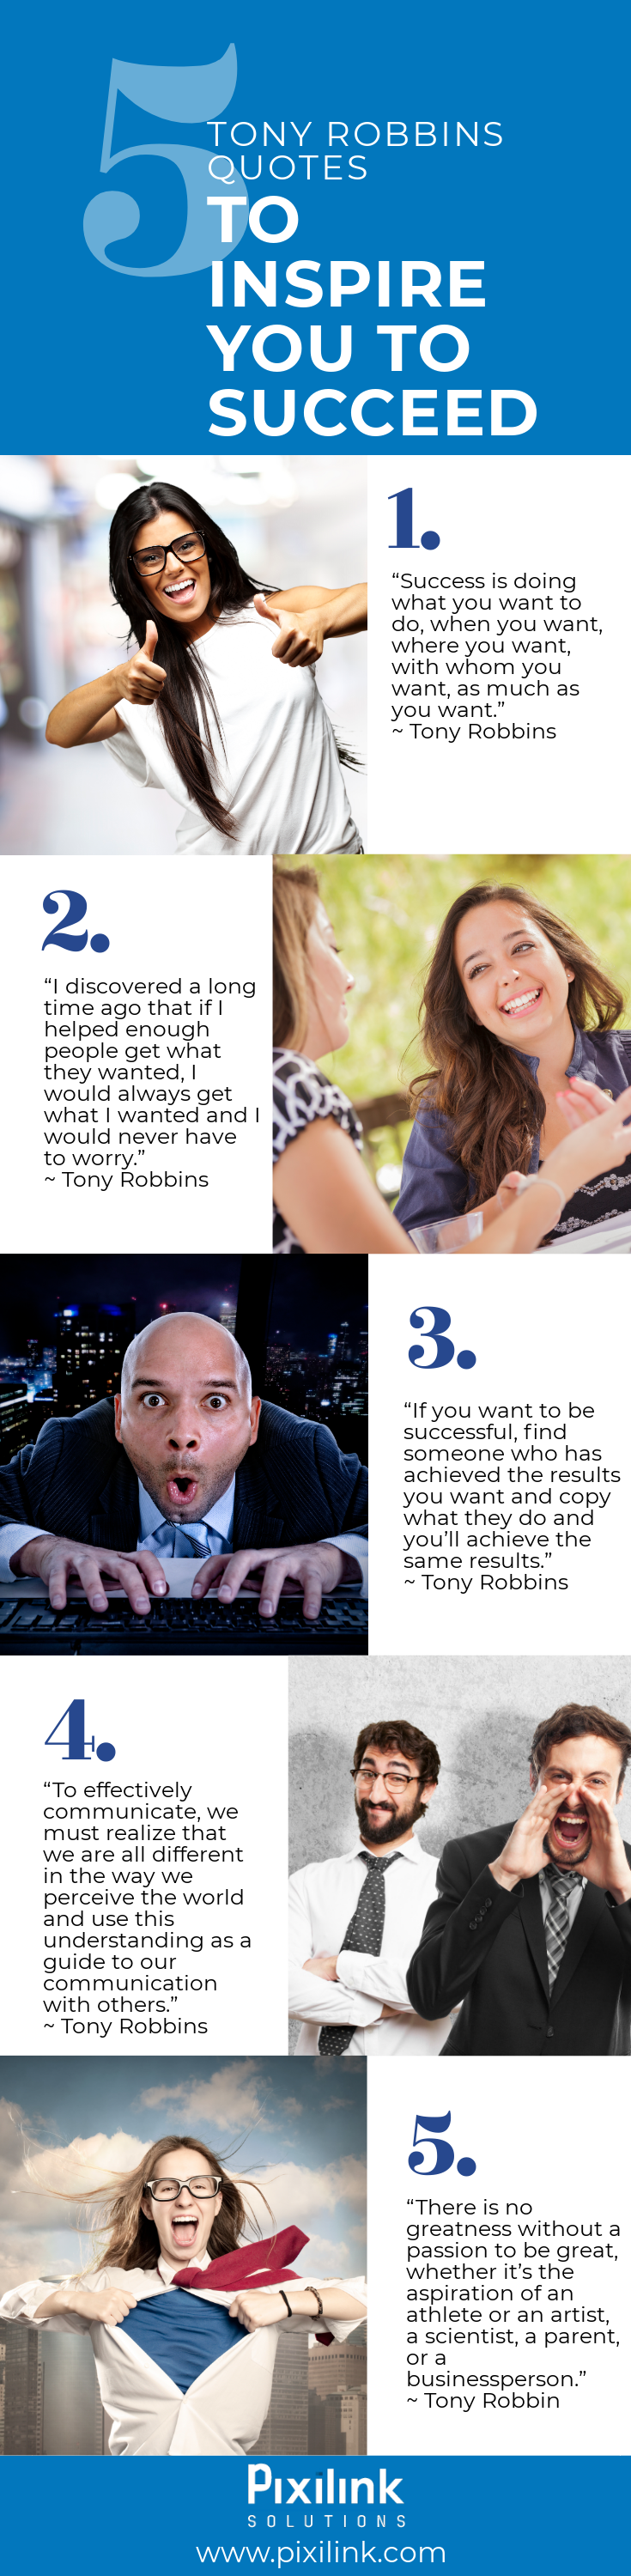 5 Tony Robbins Quotes to Inspire Success » Pixilink Solutions